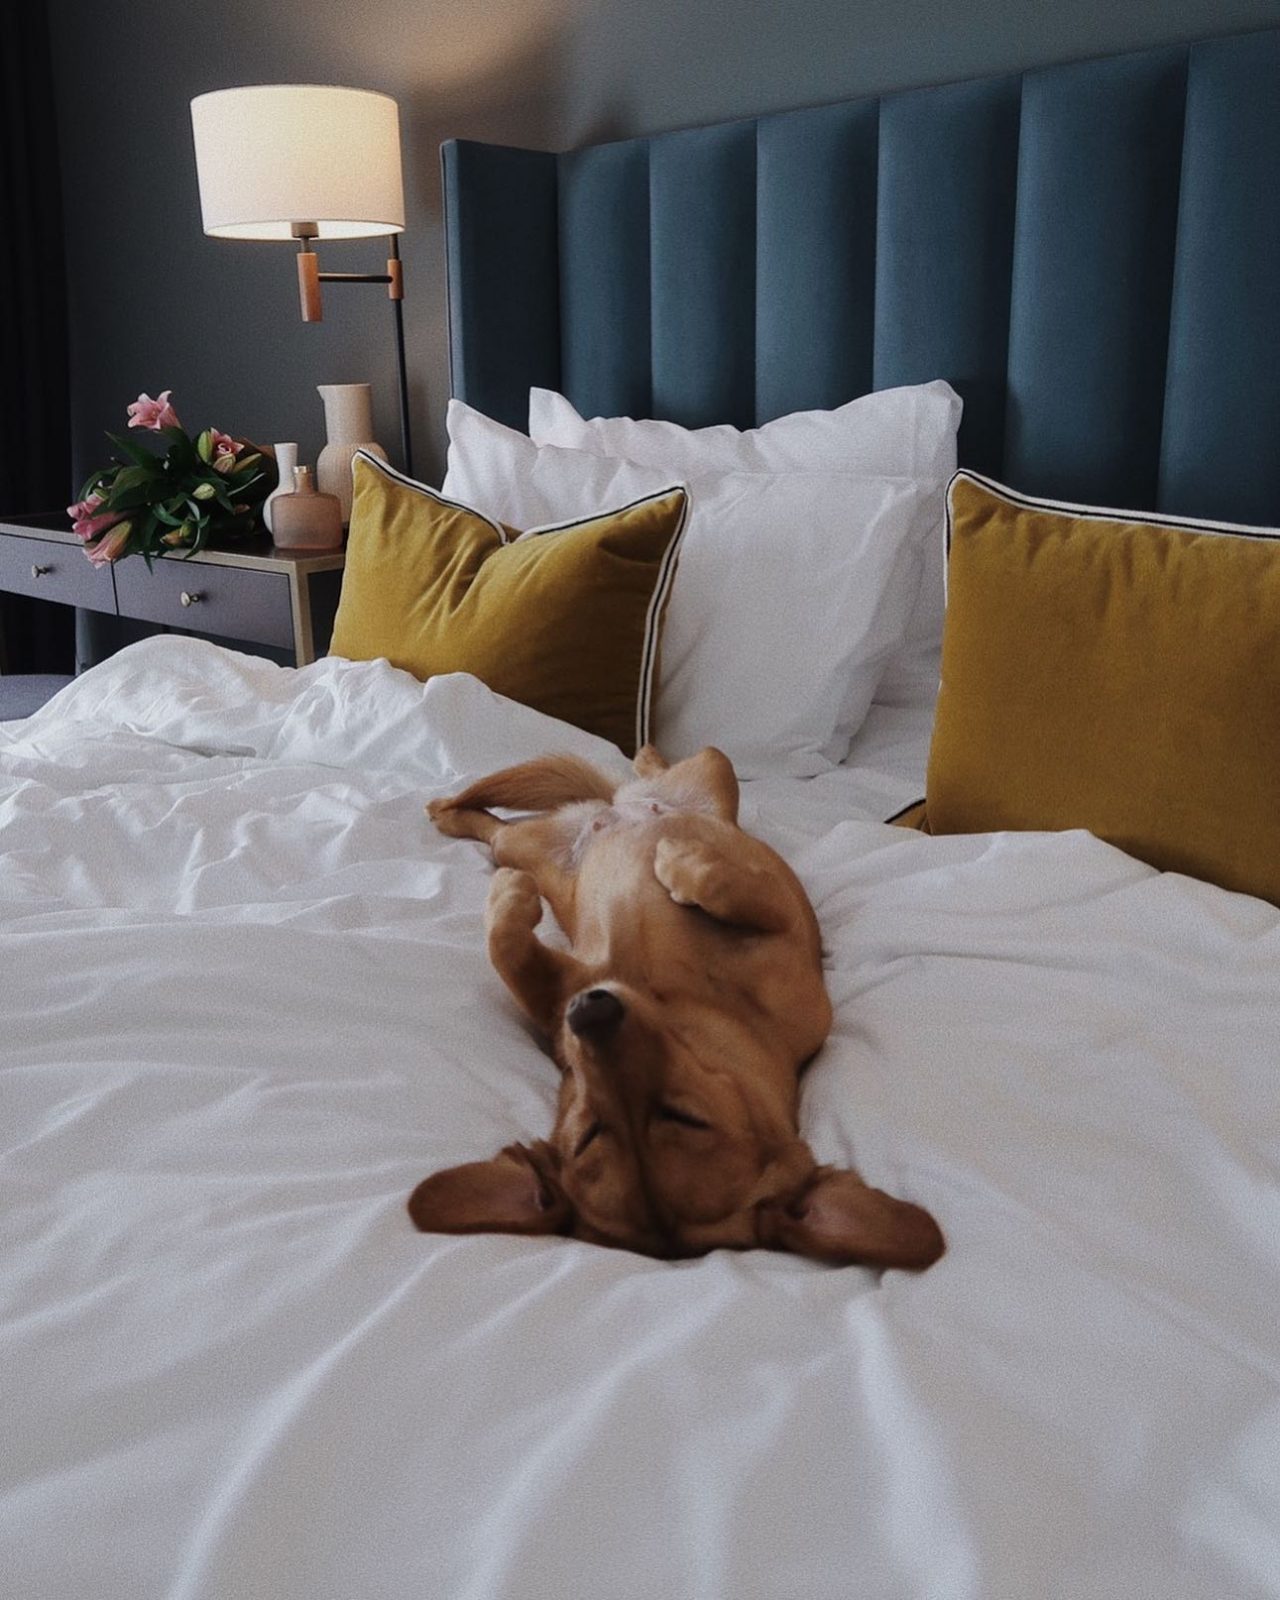 A swanky Manchester hotel is giving away hundreds of free rooms, The Manc